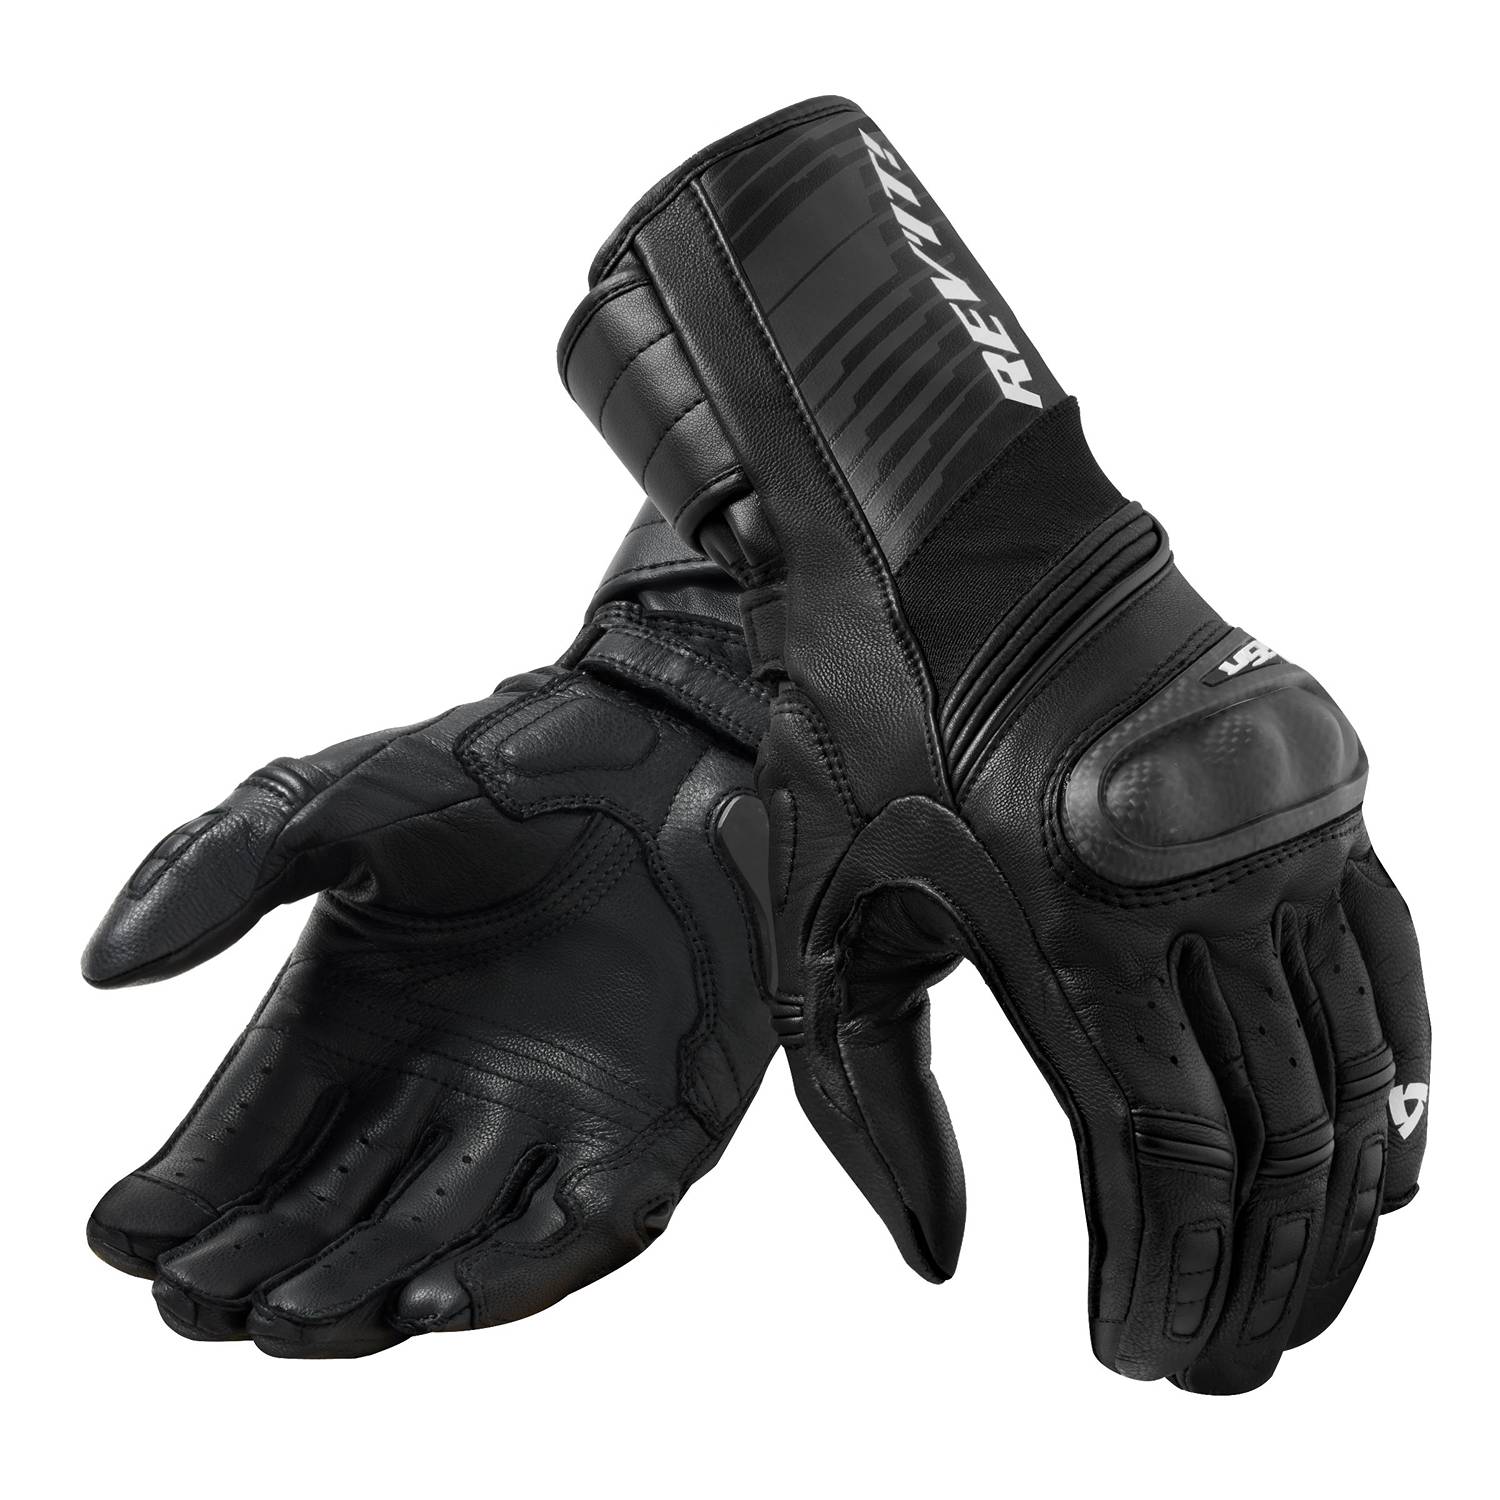 Image of REV'IT! RSR 4 Gloves Black Anthracite Size 2XL ID 8700001306713